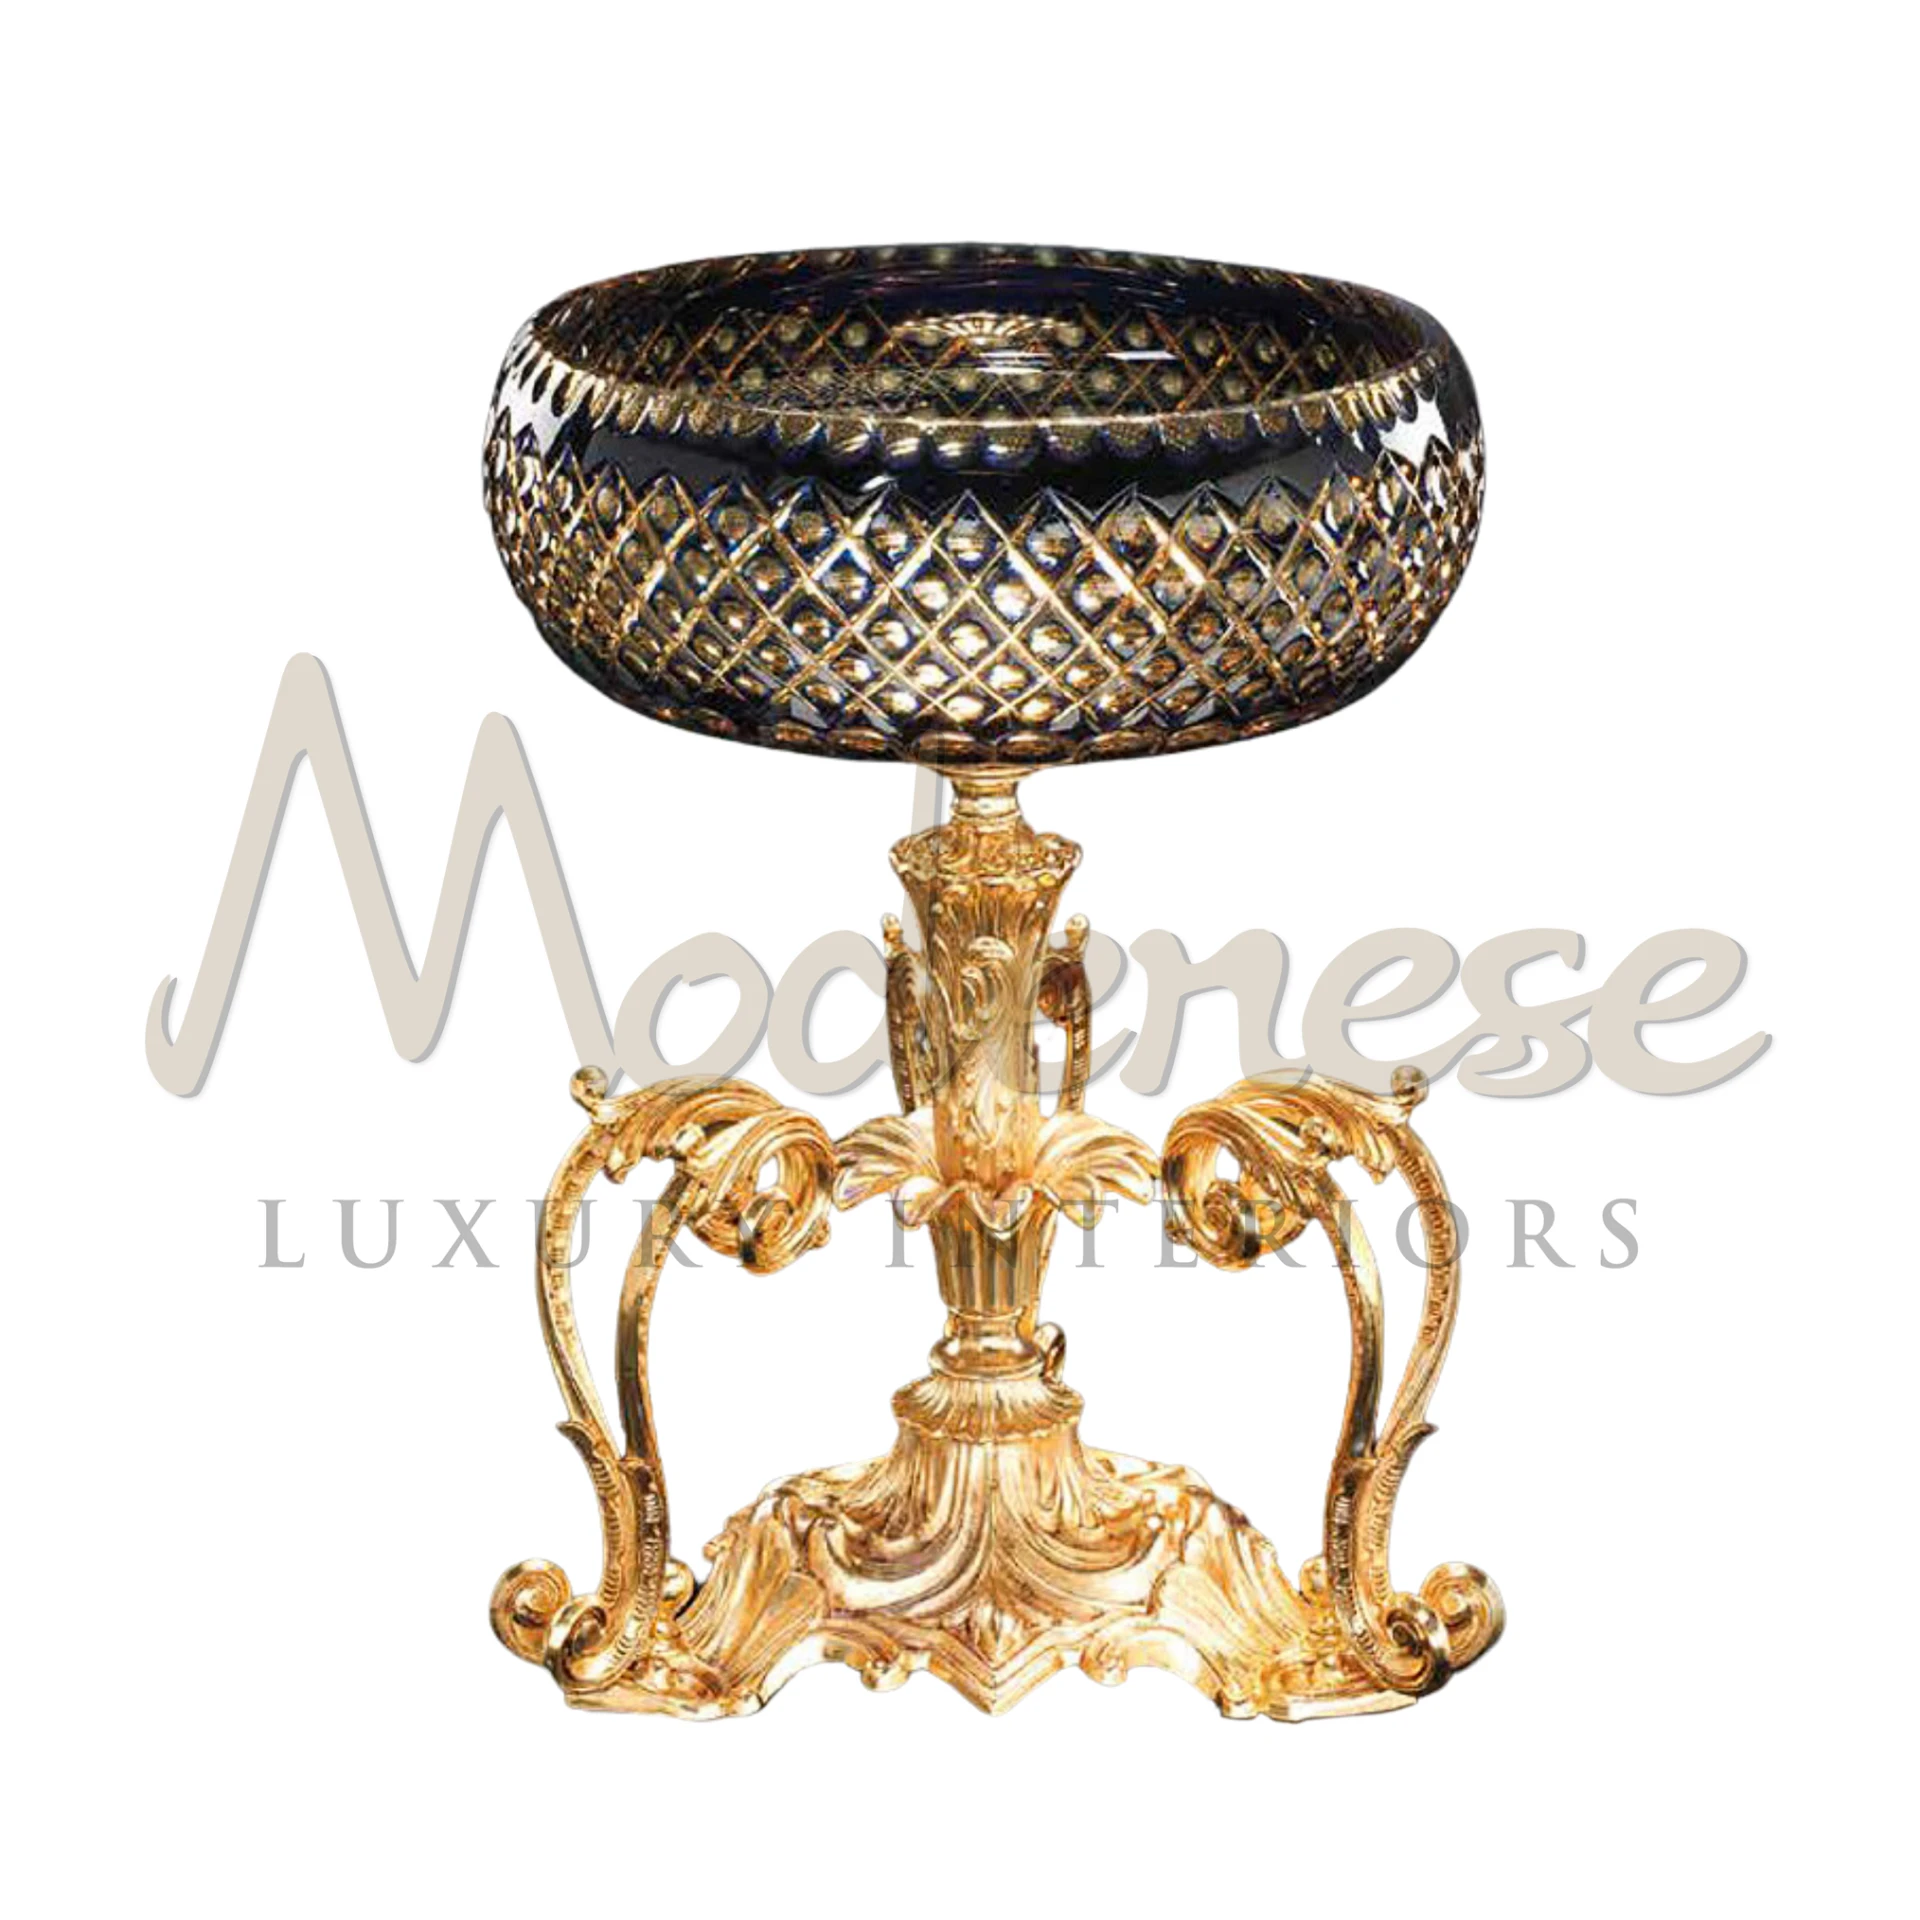 Classical Figured Bowl by Modenese, crafted in glass or crystal with intricate scenes, ideal for luxury interiors.






